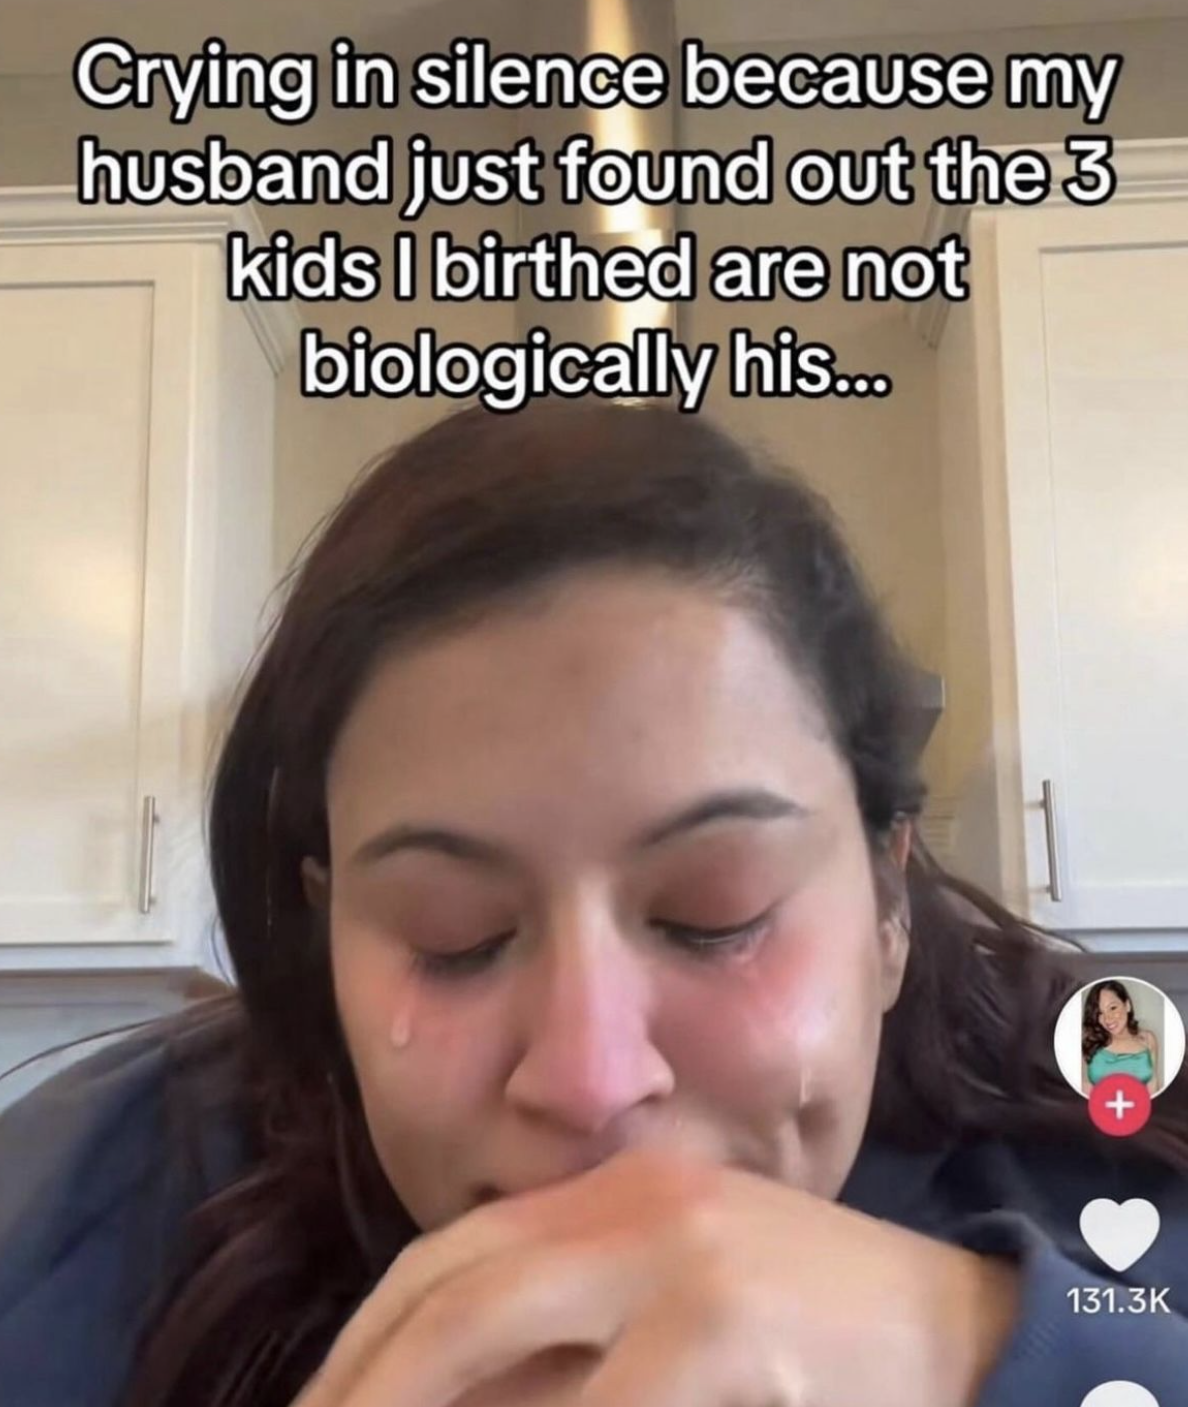 girl - Crying in silence because my husband just found out the 3 kids I birthed are not biologically his...